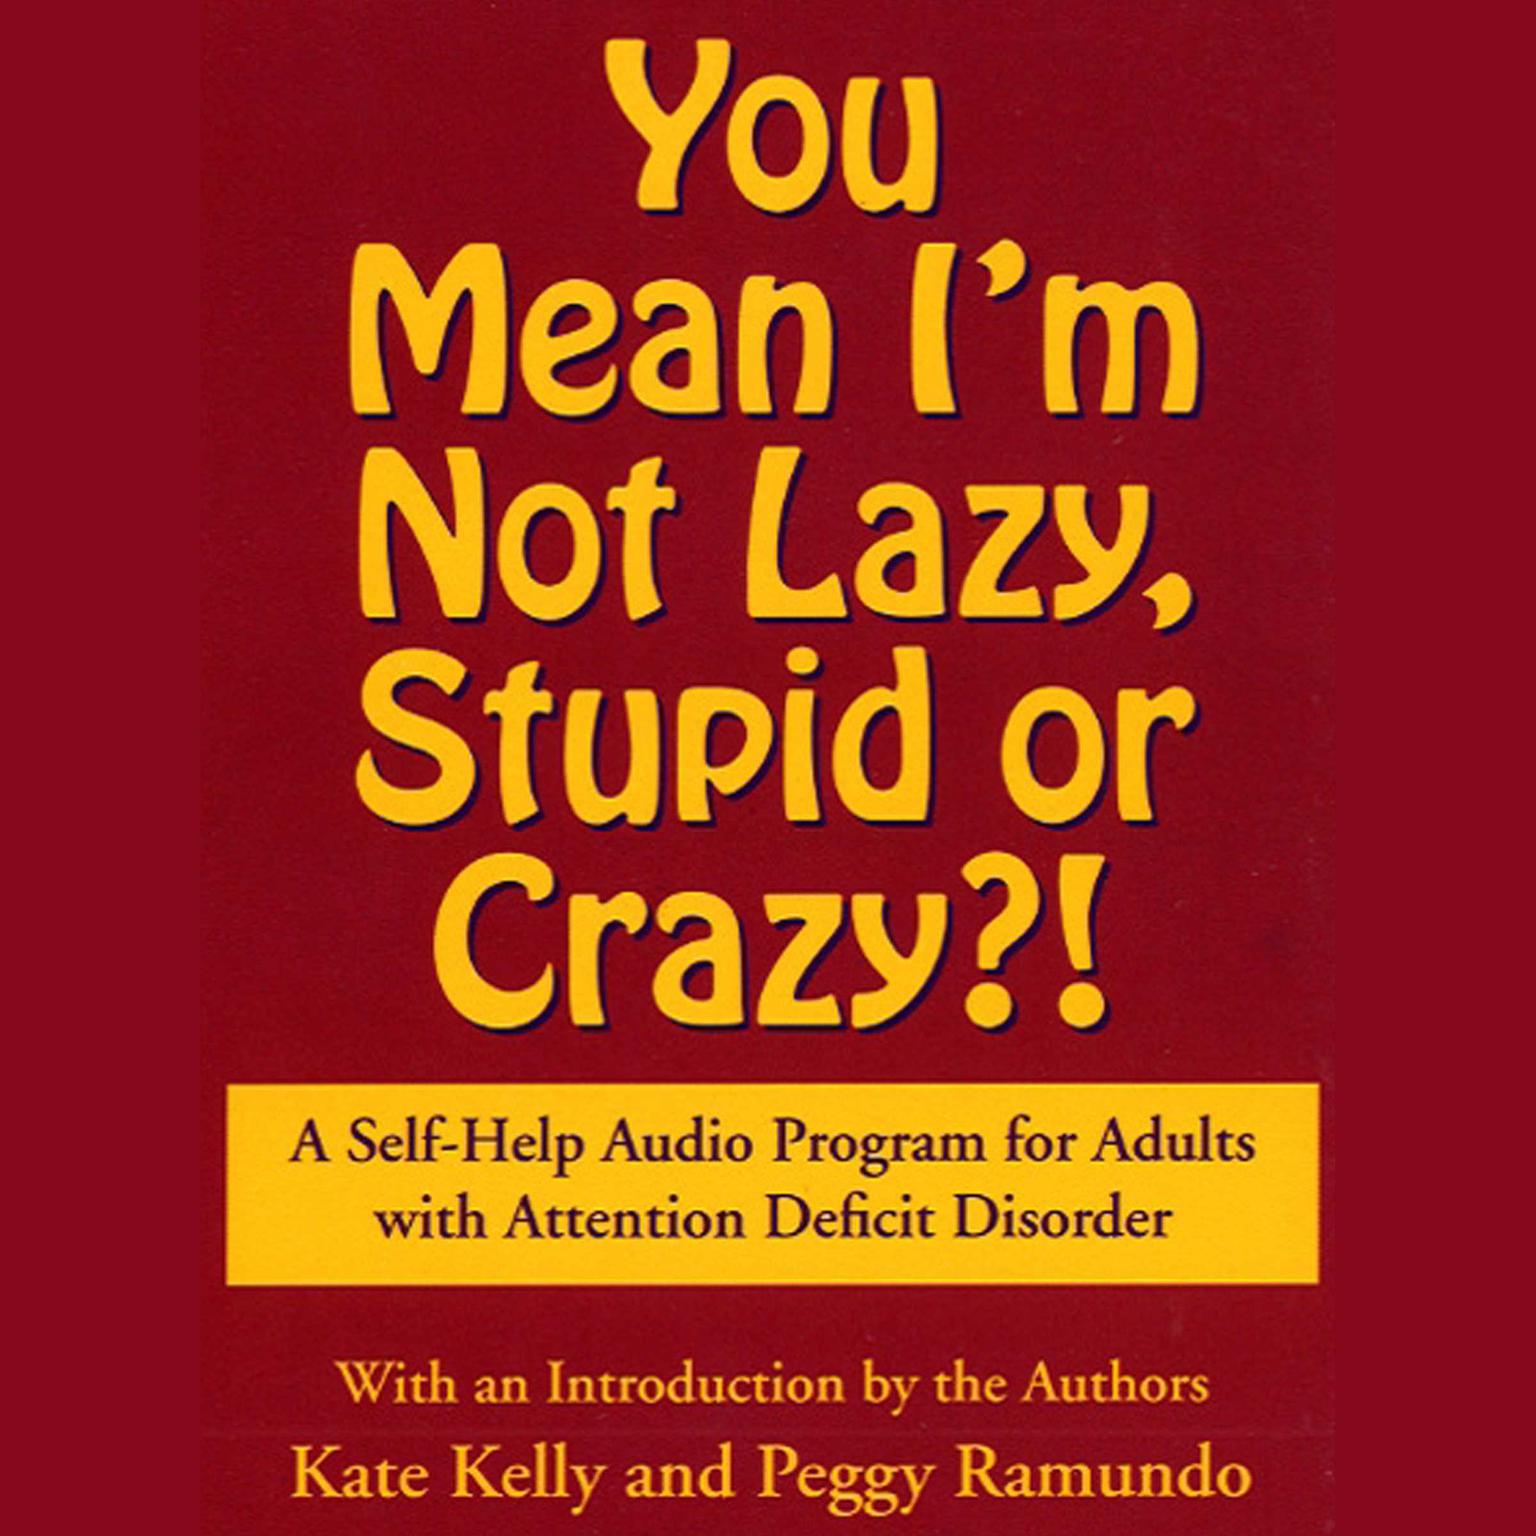 You Mean Im Not Lazy, Stupid or Crazy? (Abridged): A Self-help Audio Program for Adults with Attention Deficit Disorder Audiobook, by Kate Kelly